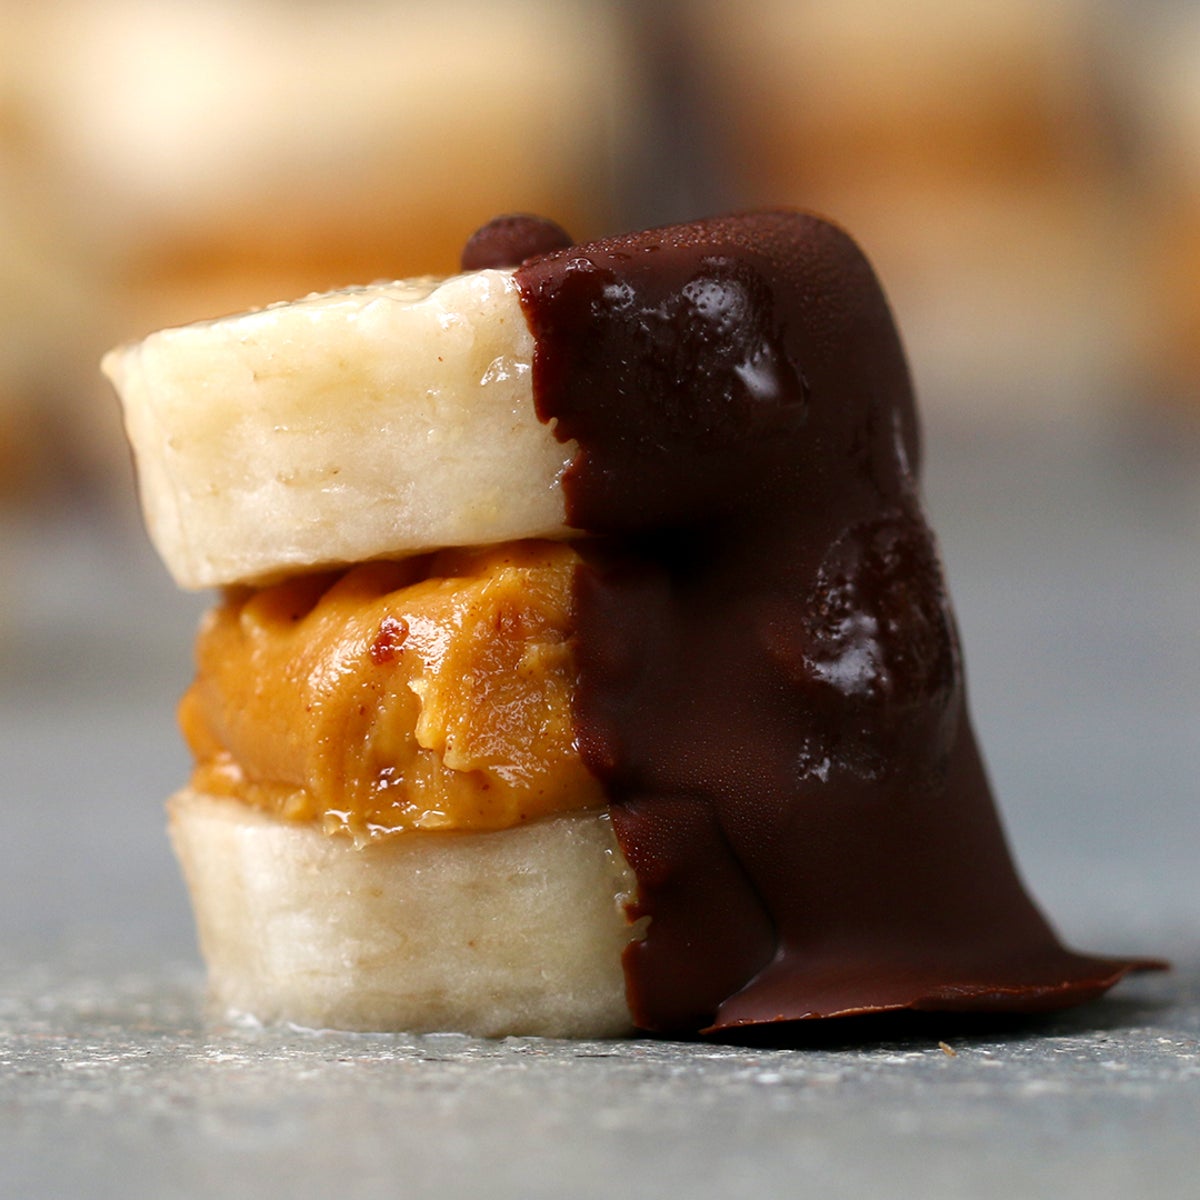 Dark Chocolate Peanut Butter Filled Bites + Plant-Based Protein